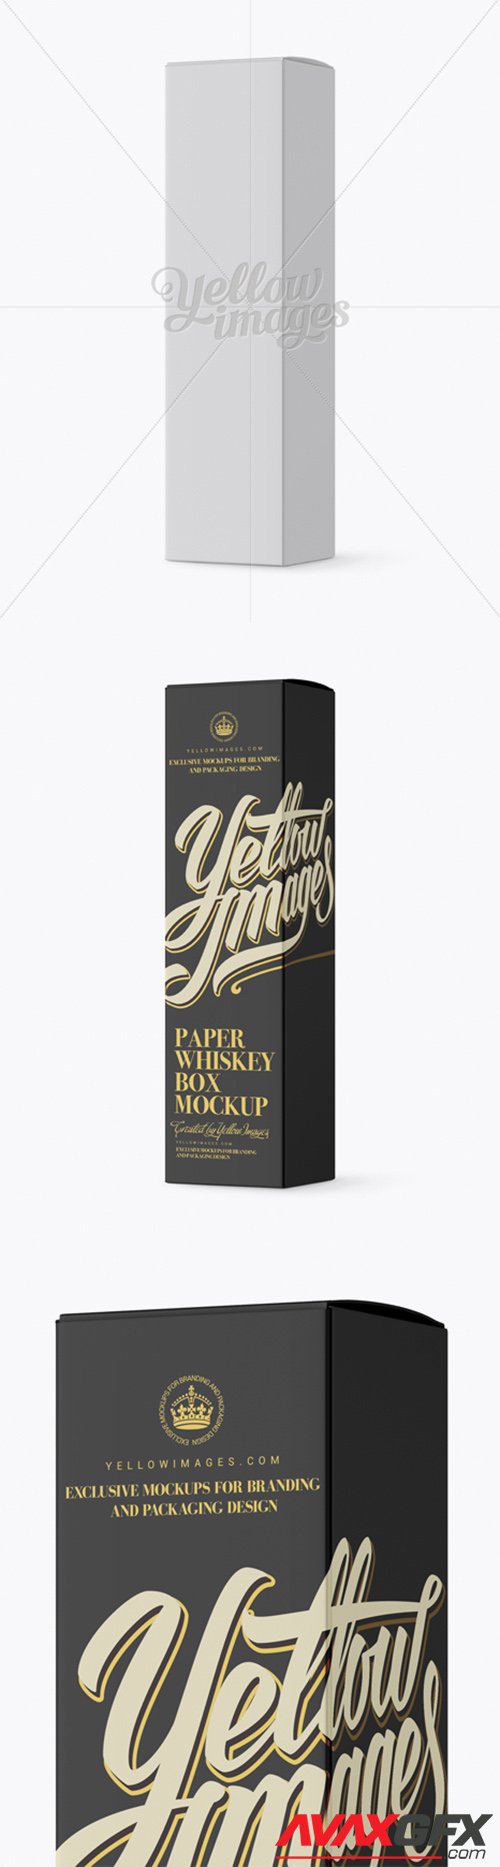 Download Paper Whisky Box Mockup Halfside View 16150 Tif Avaxgfx All Downloads That You Need In One Place Graphic From Nitroflare Rapidgator PSD Mockup Templates